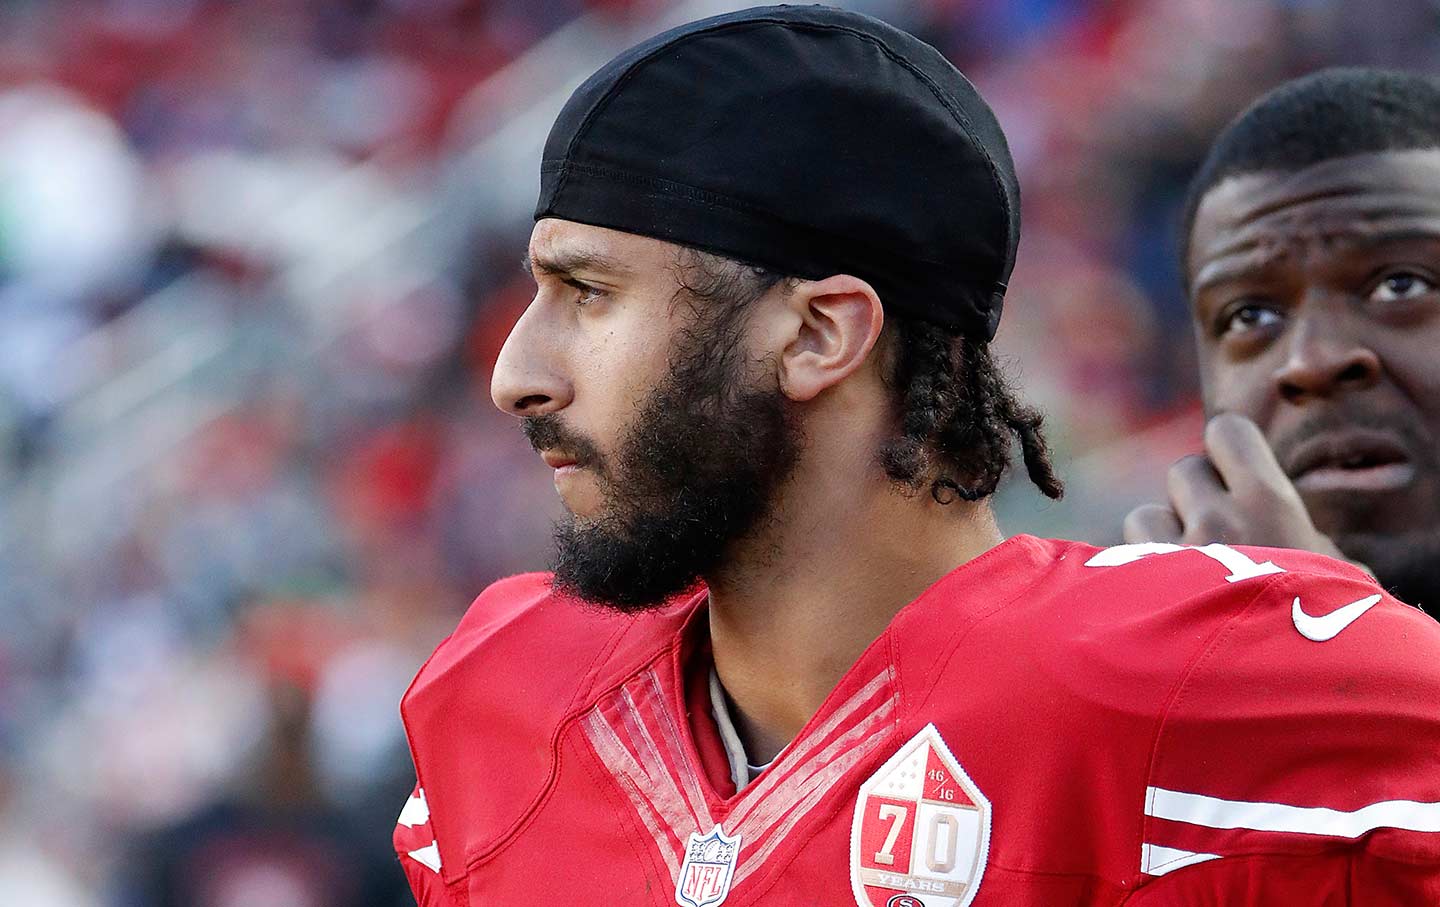 Colin Kaepernick Finally Has a Shot at Getting Signed, but a High